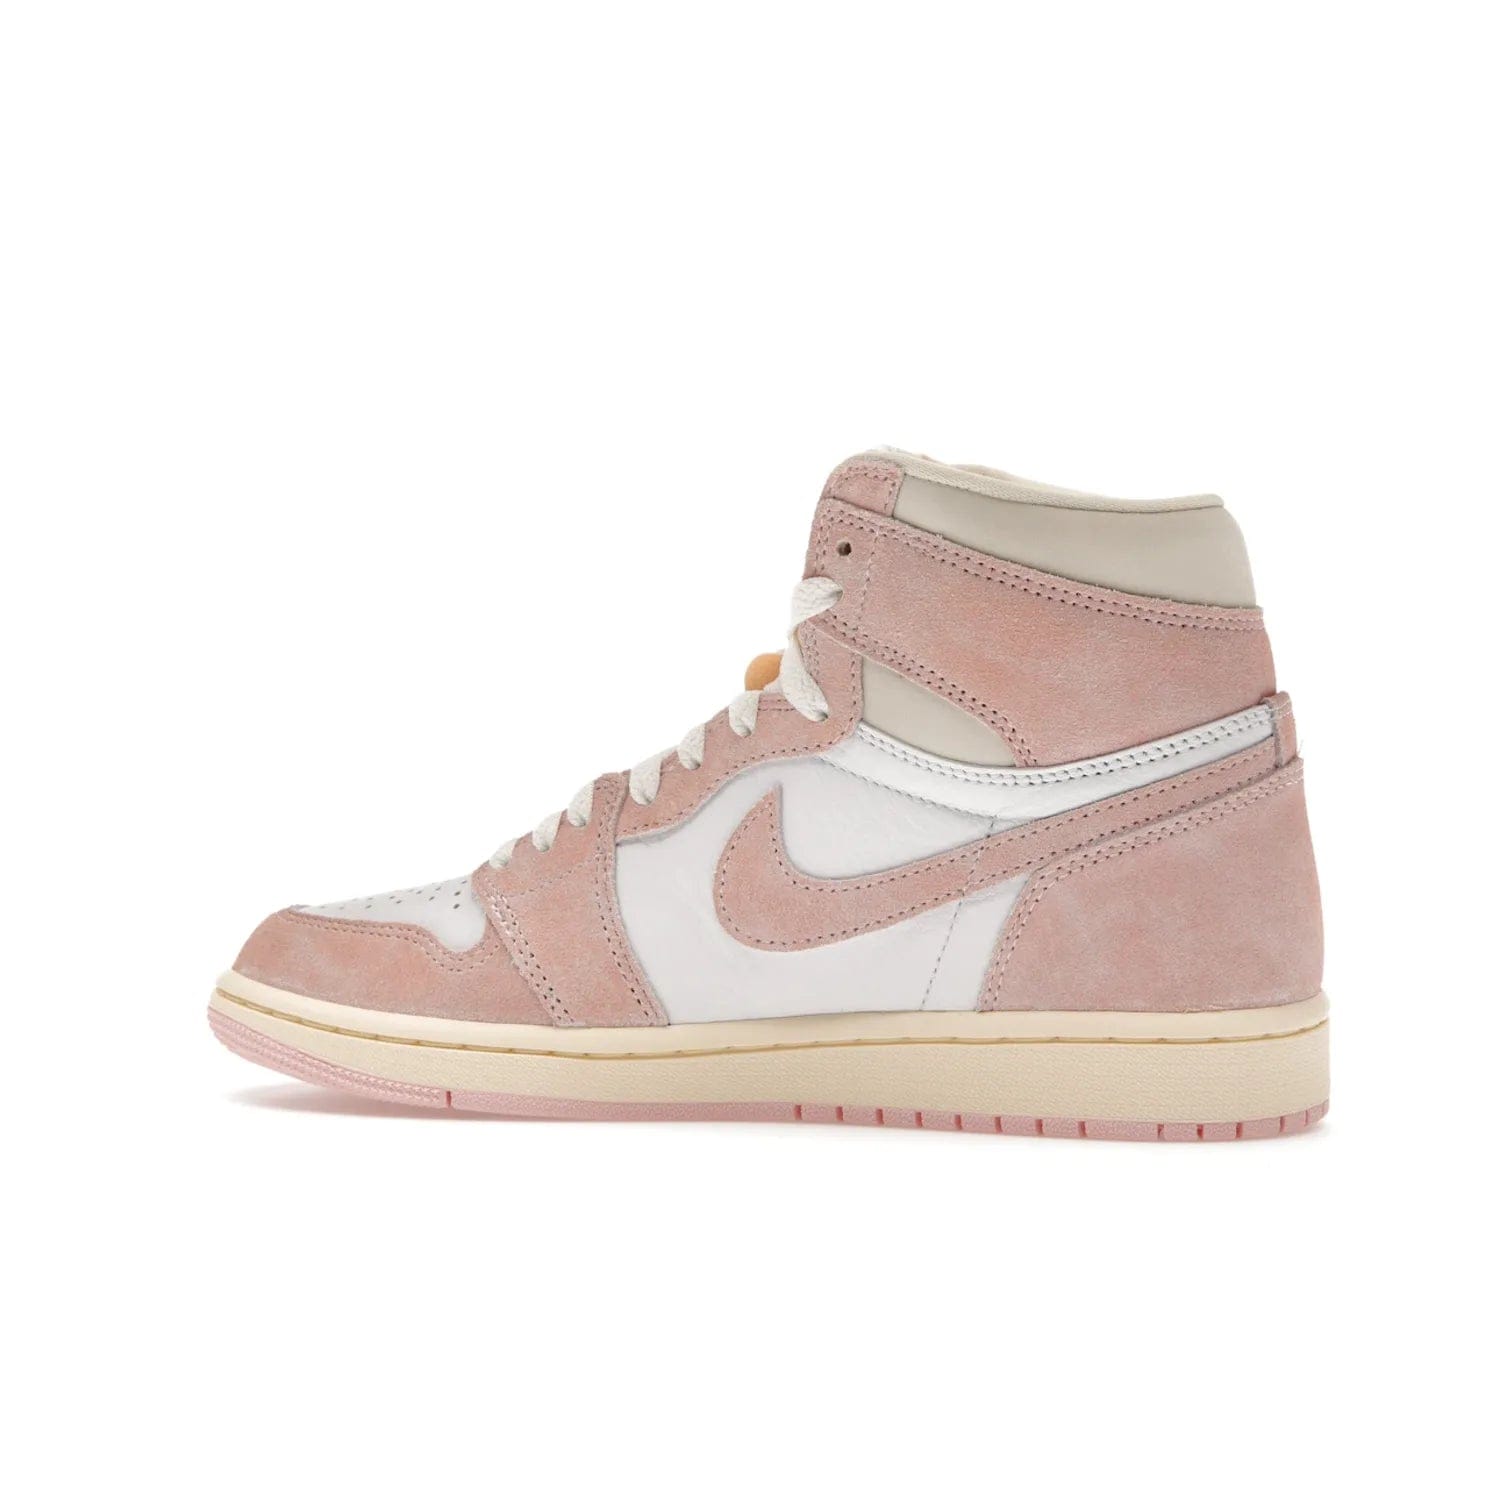 Jordan 1 Retro High OG Washed Pink (Women's) - Image 21 - Only at www.BallersClubKickz.com - Iconic Air Jordan 1 Retro High OG for women with unique pink suede and white leather uppers. Get the timeless look on April 22, 2023.